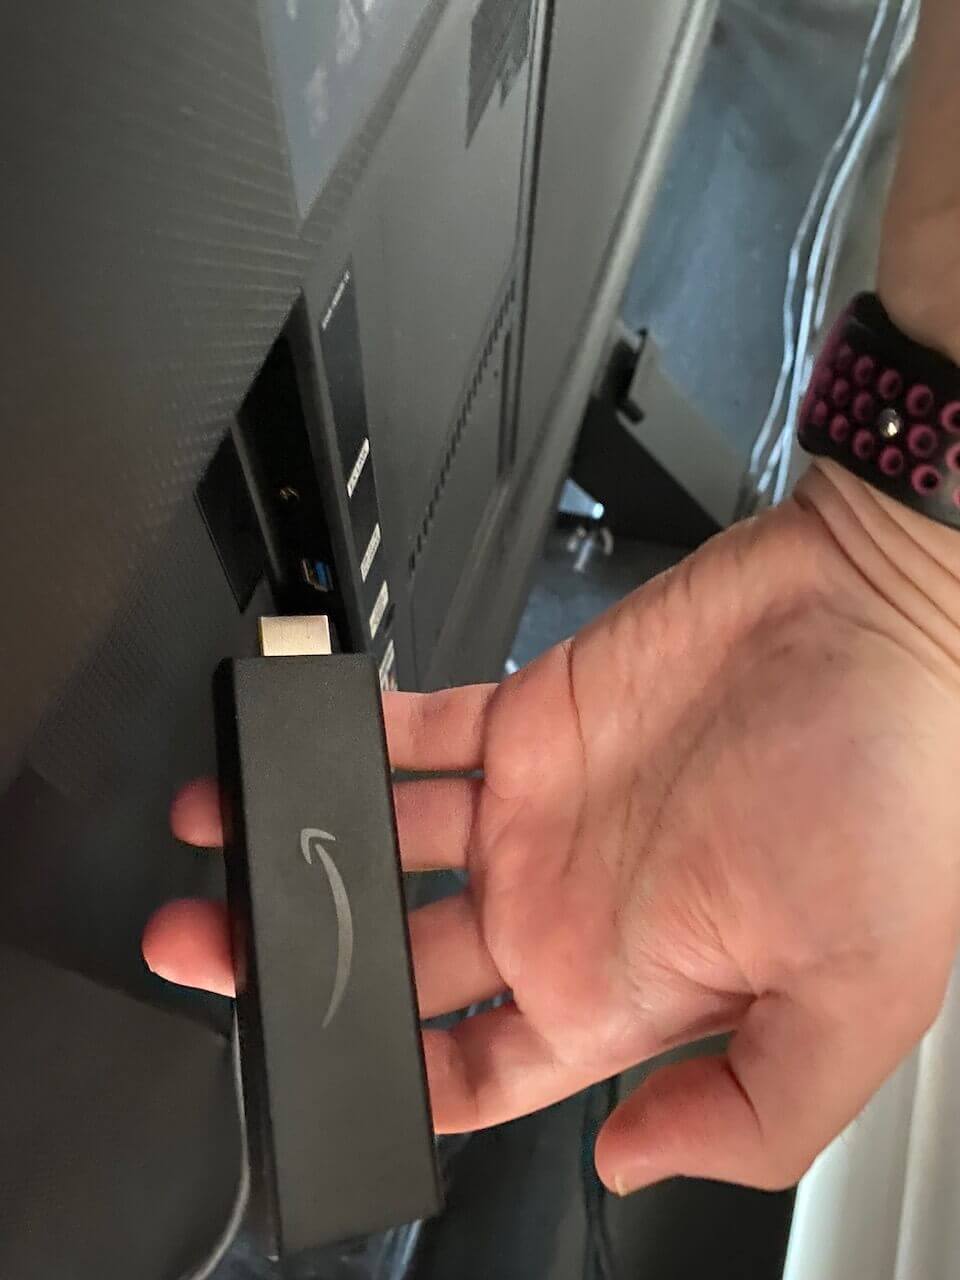 A Fire TV Stick held in front of the HDMI port where it plugs in